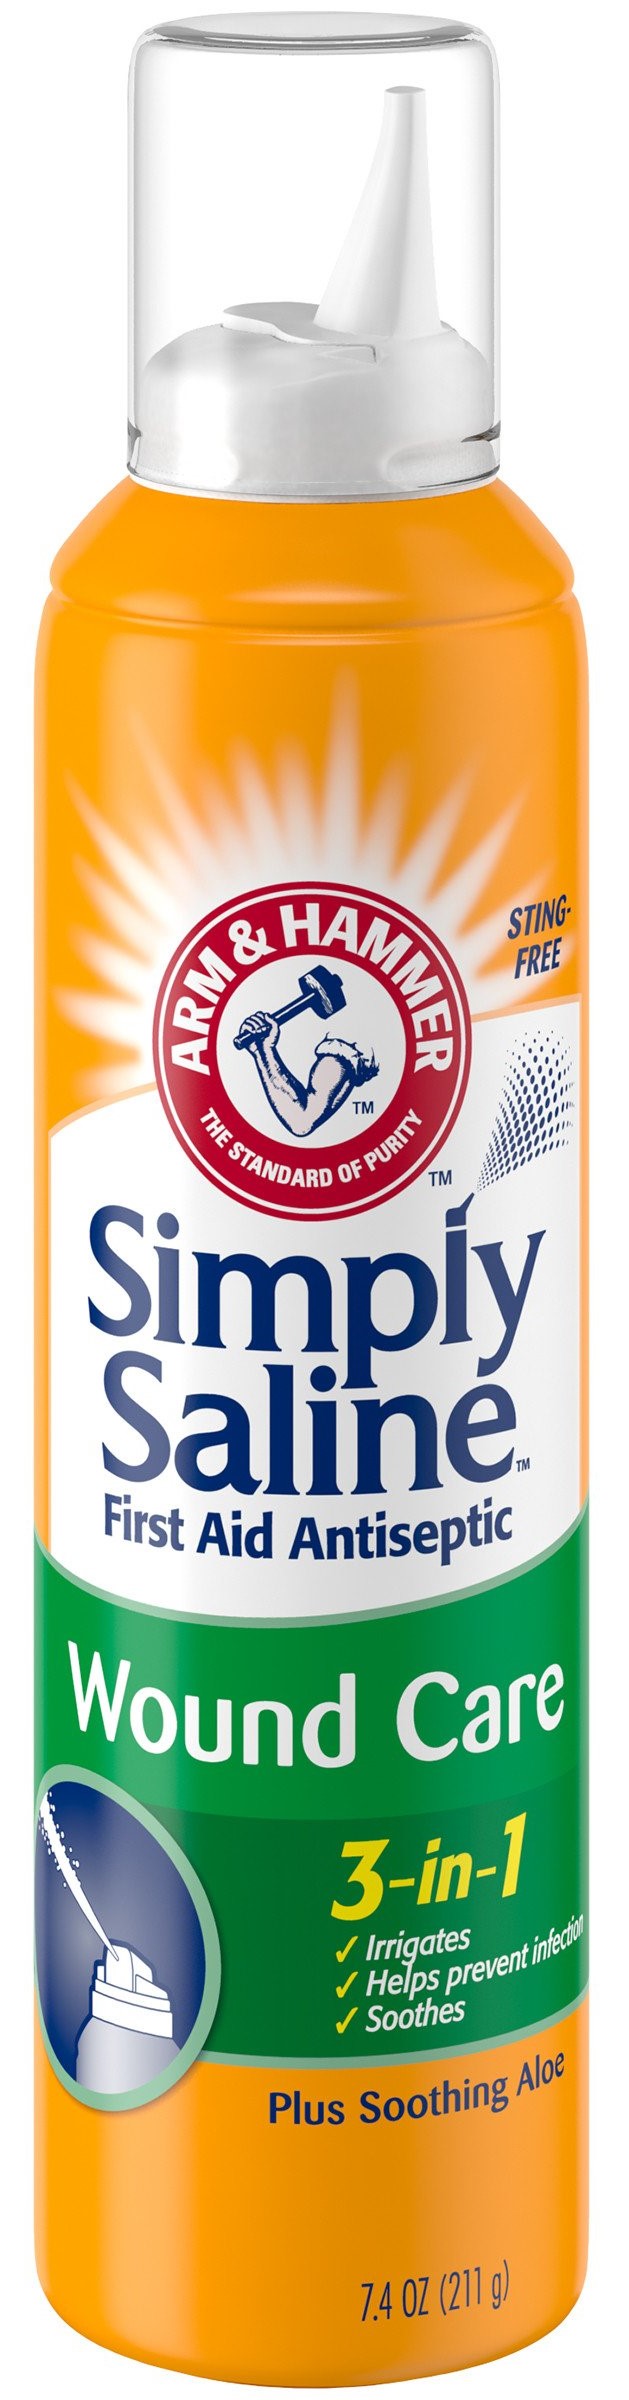 Arm & Hammer Simply Saline 3 in 1 Wound Care 7.4oz